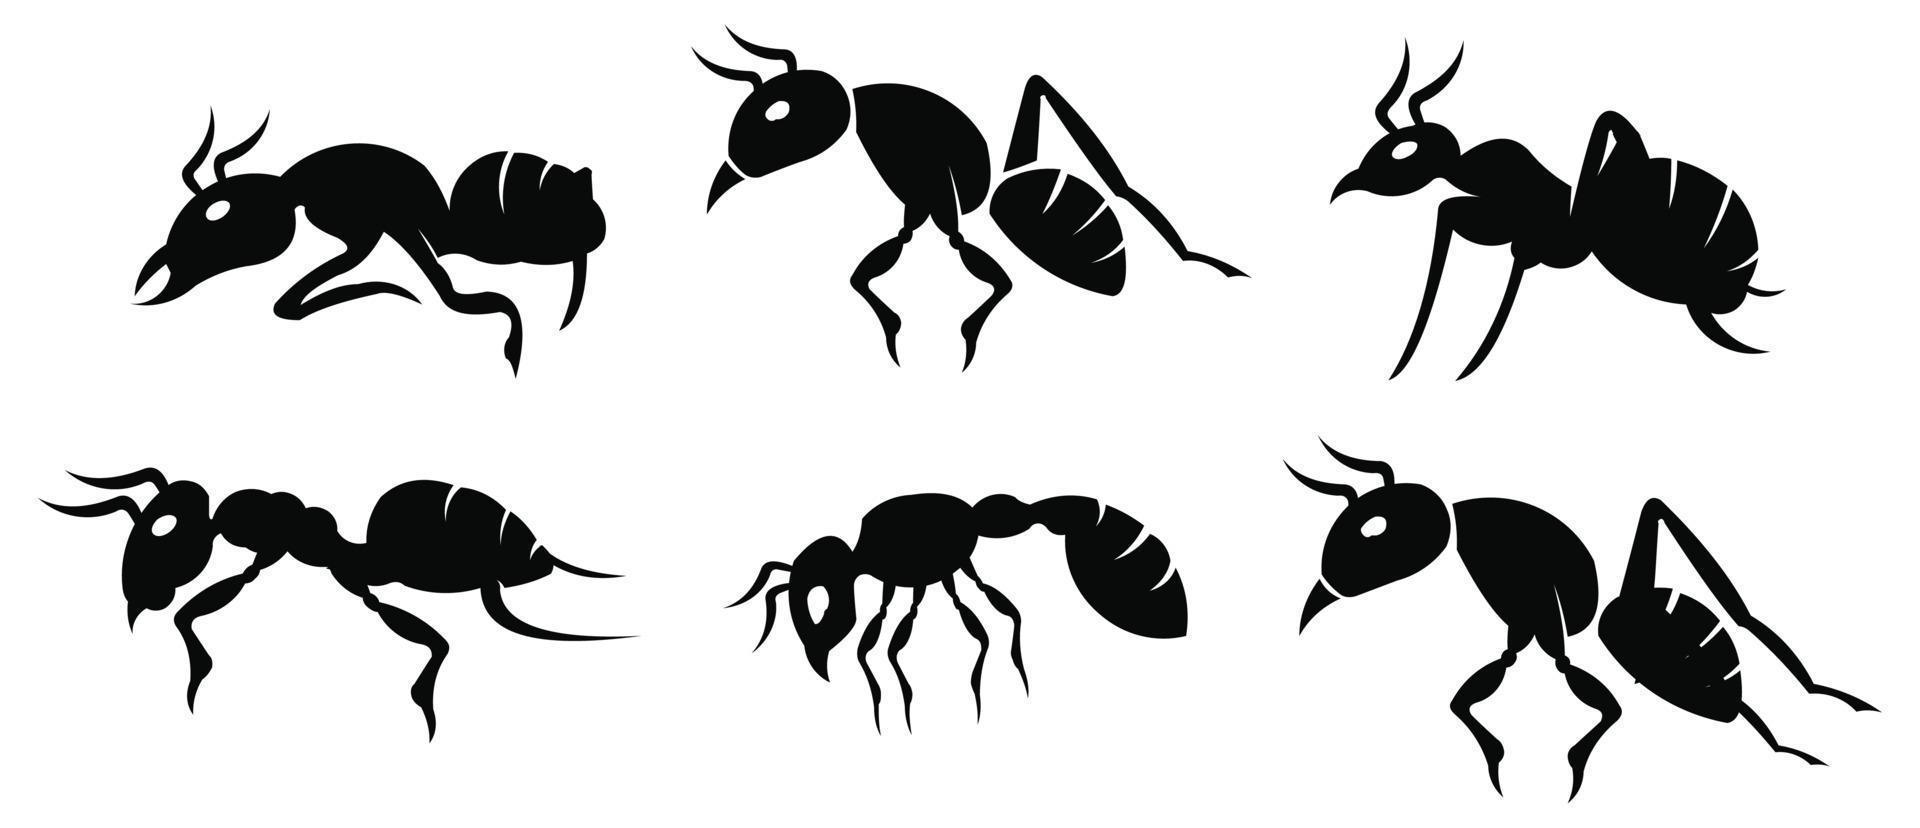 Ant set Black insect silhouettes trip ,Ant black teamwork colony group vector